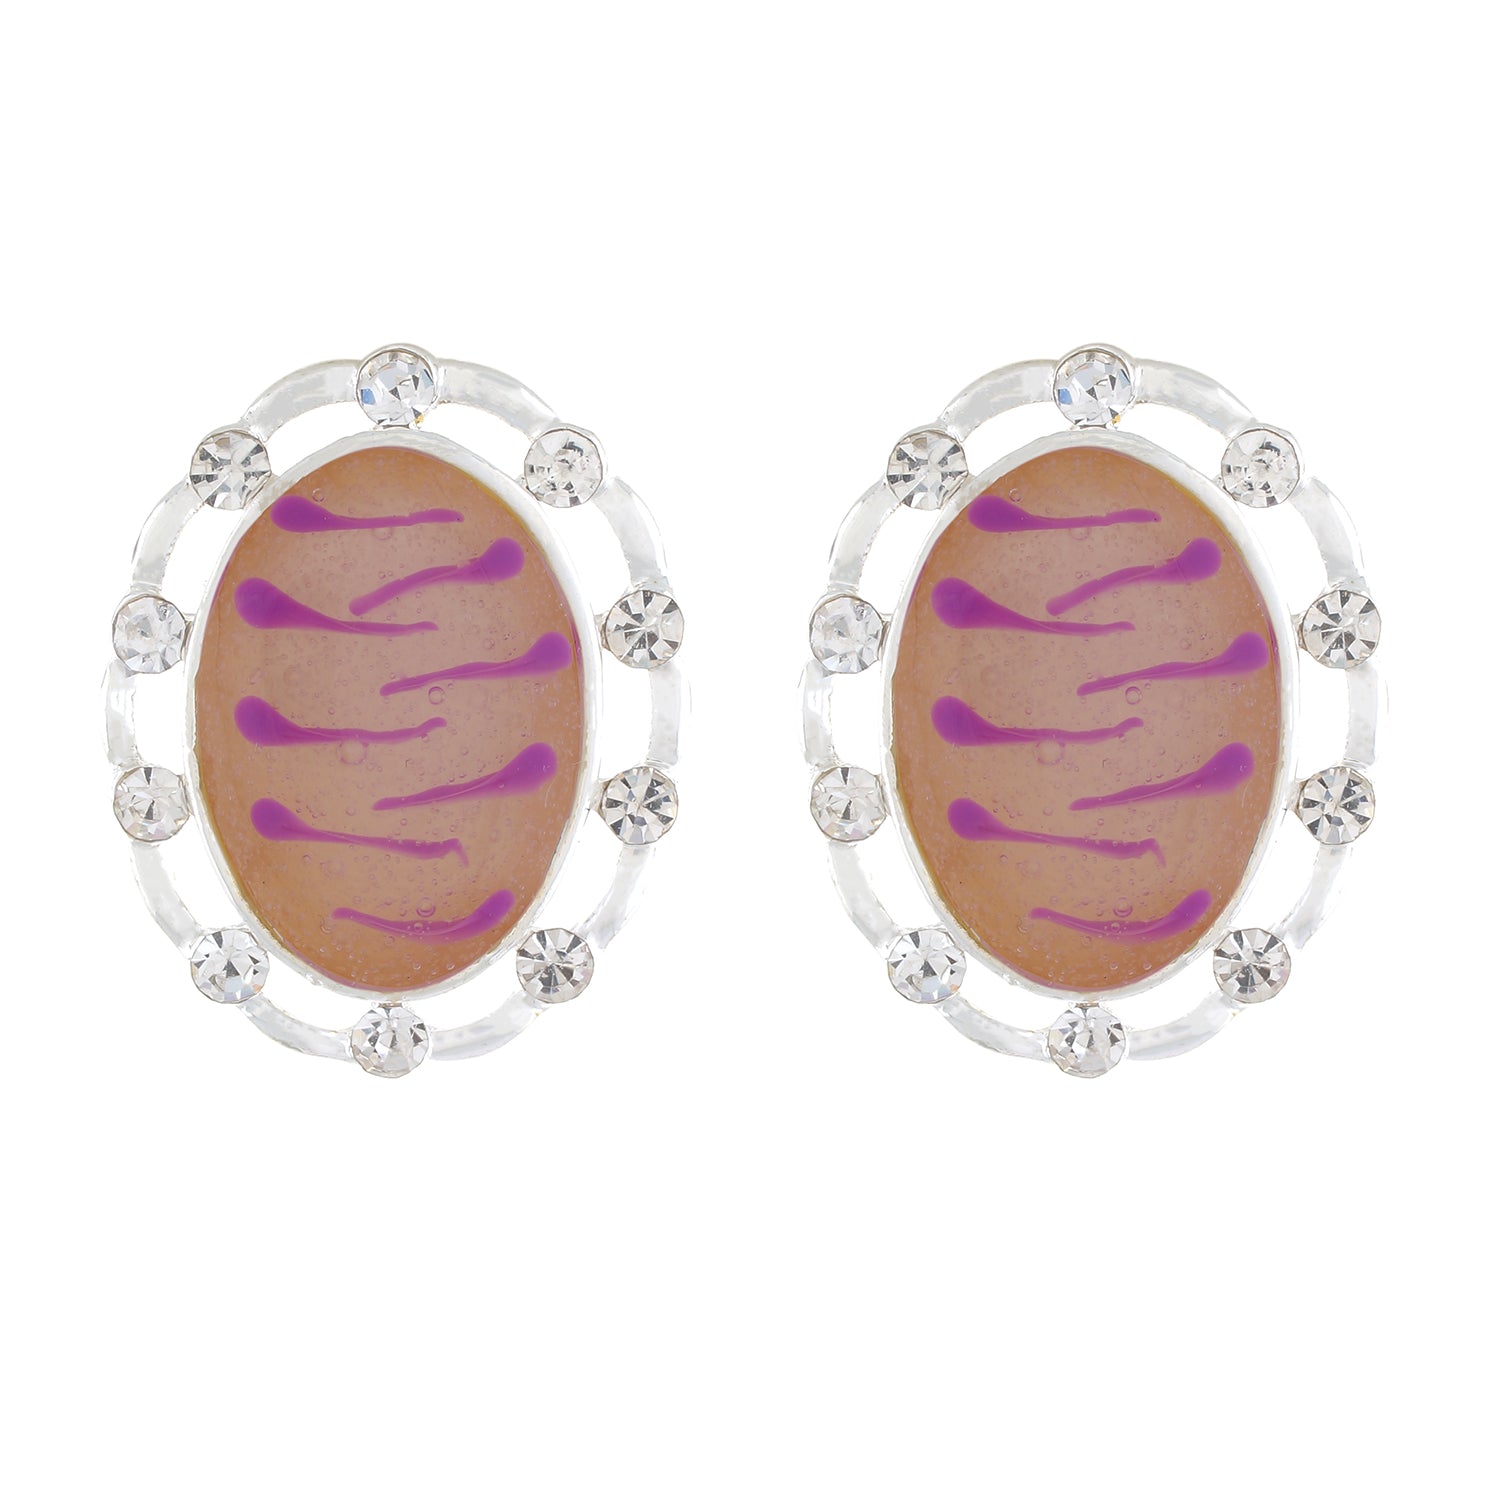 Pink colour Oval Design  Stud Earrings for Girls and Women